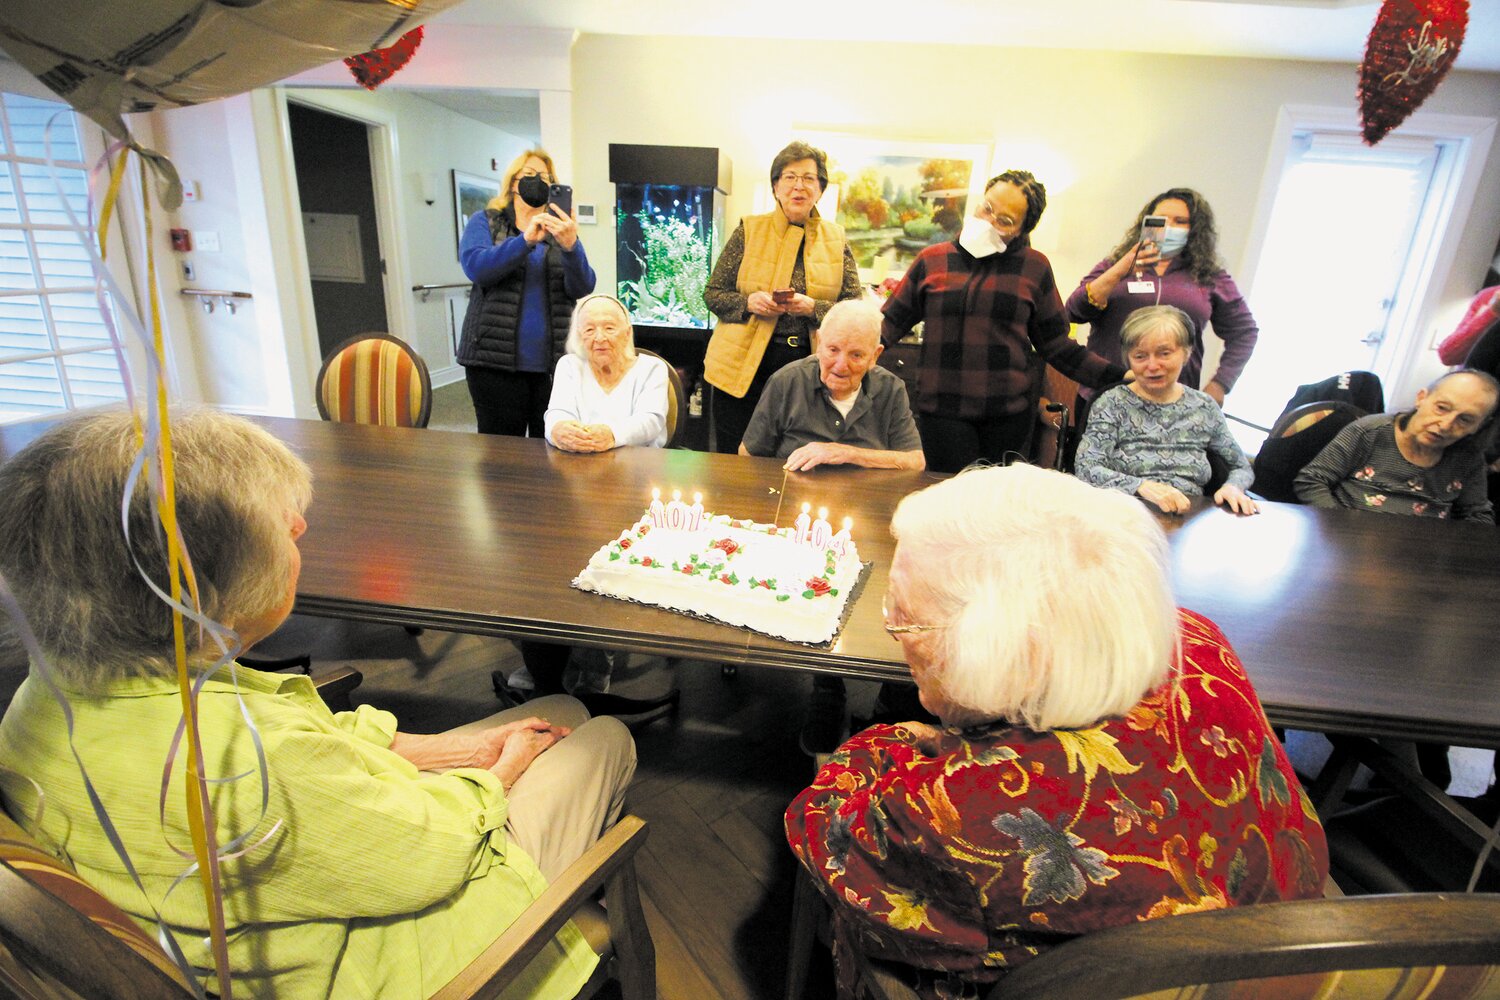 TIME FOR SOME SINGING: Residents, staff and family members of the Green House at Saint Elizabeth in East Greenwich celebrate the birthdays of Evaline and Annette.